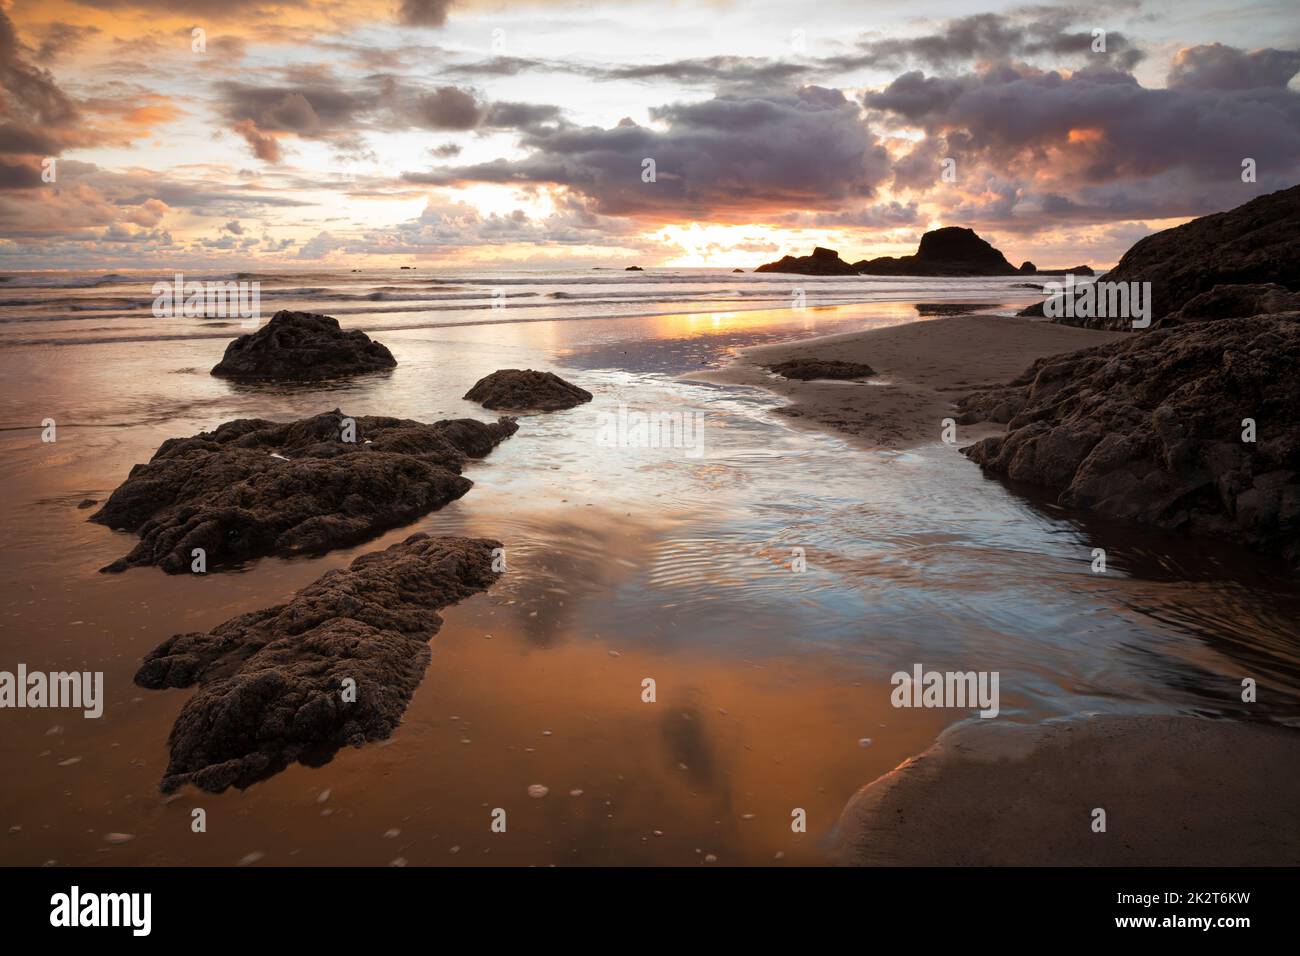 WA22053-00...WASHINGTON - The Pacific Ocean at sunset from Ruby Beach in Olympic National Park. Stock Photo